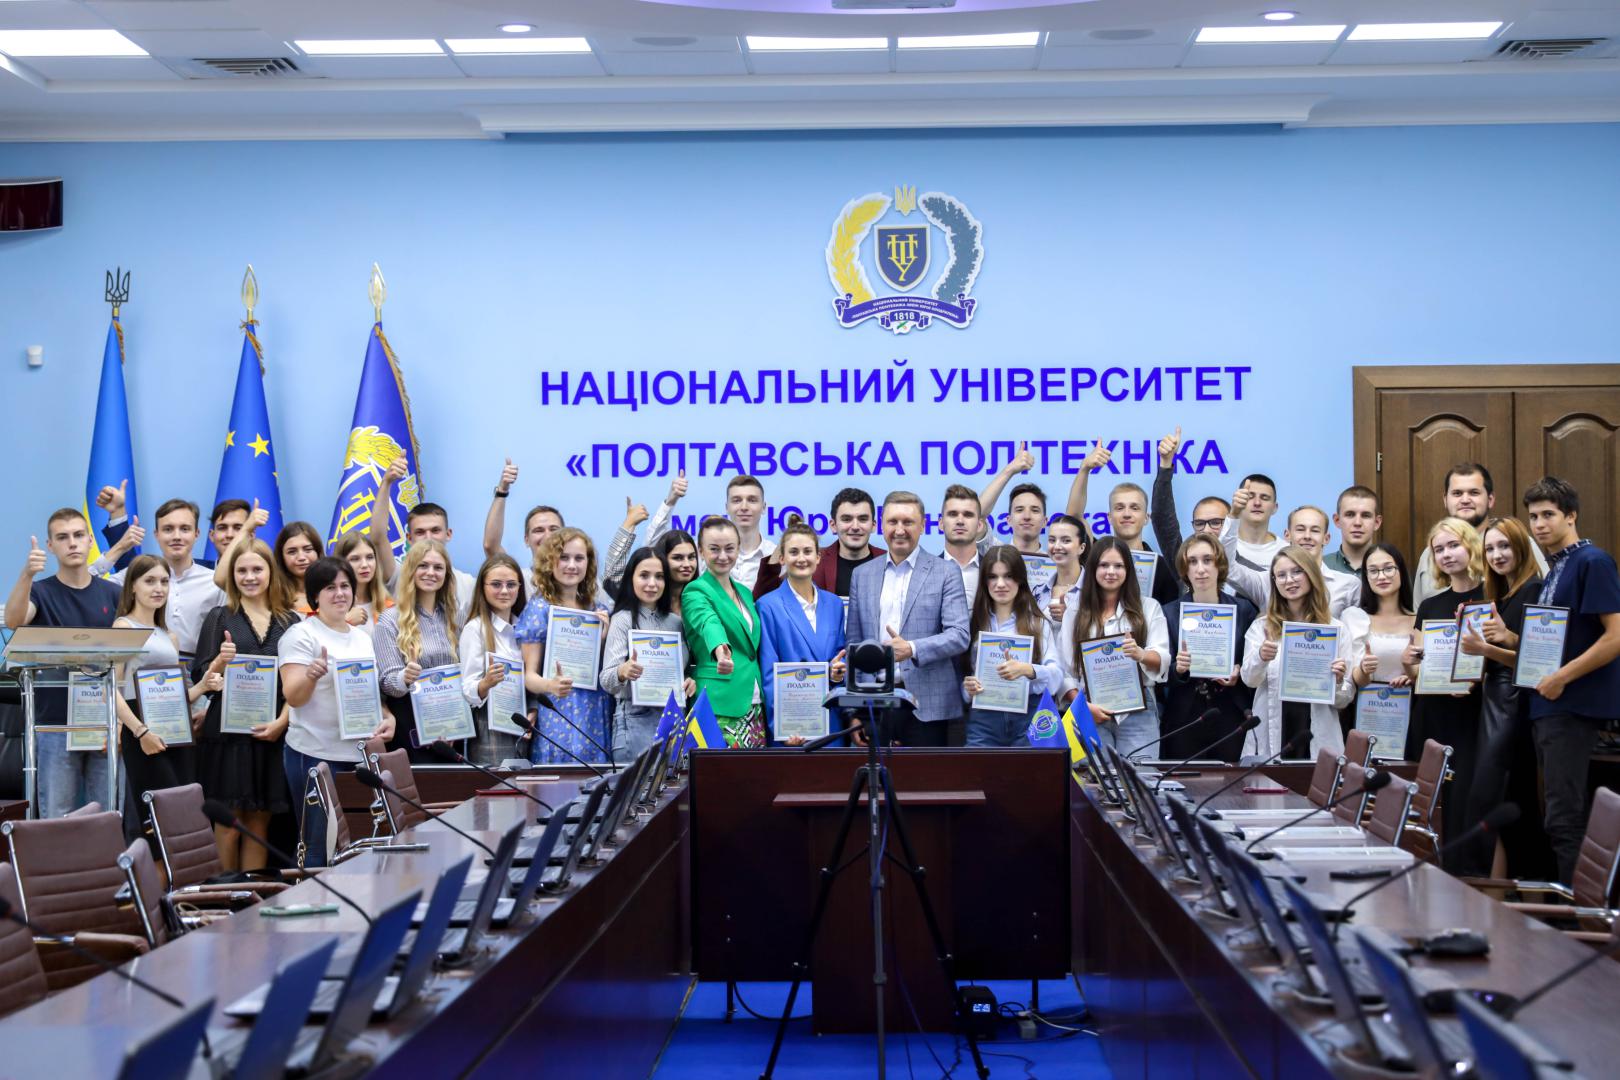 Leaders of youth councils of Poltava region and active students receive awards on the occasion of International Youth Day